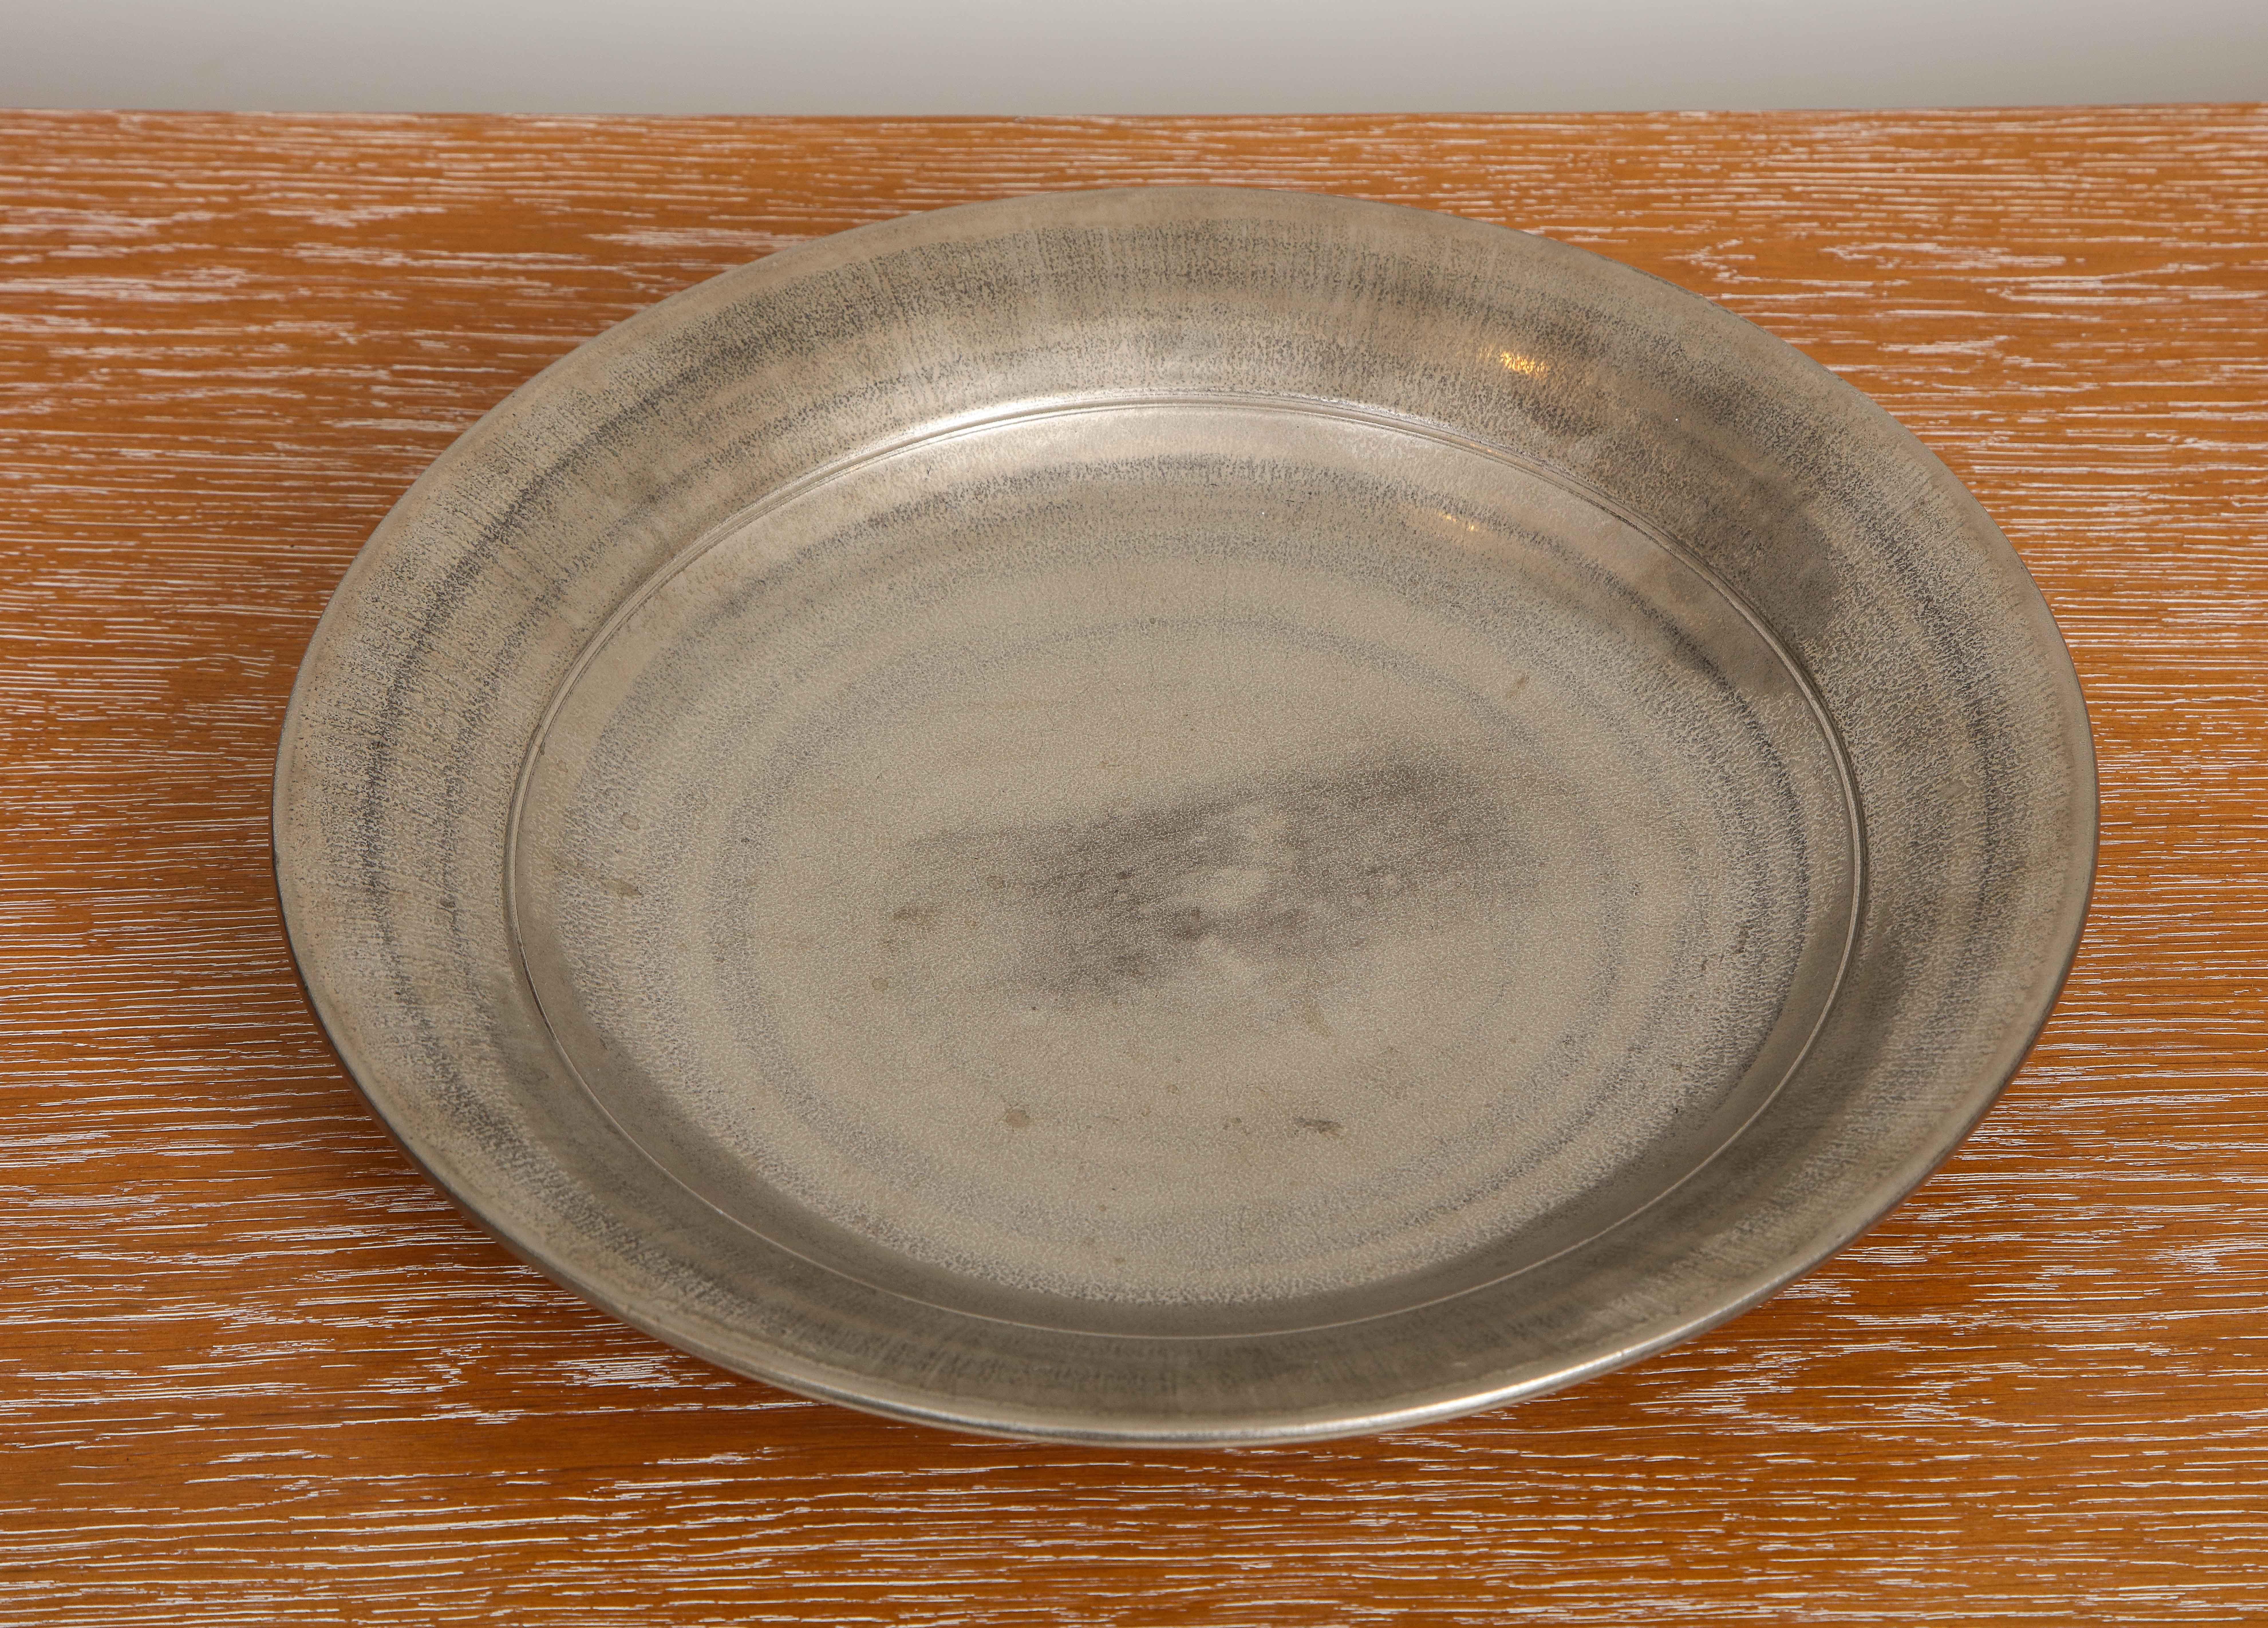 Silvered Porcelain Platter Signed and Dated on Verso 1